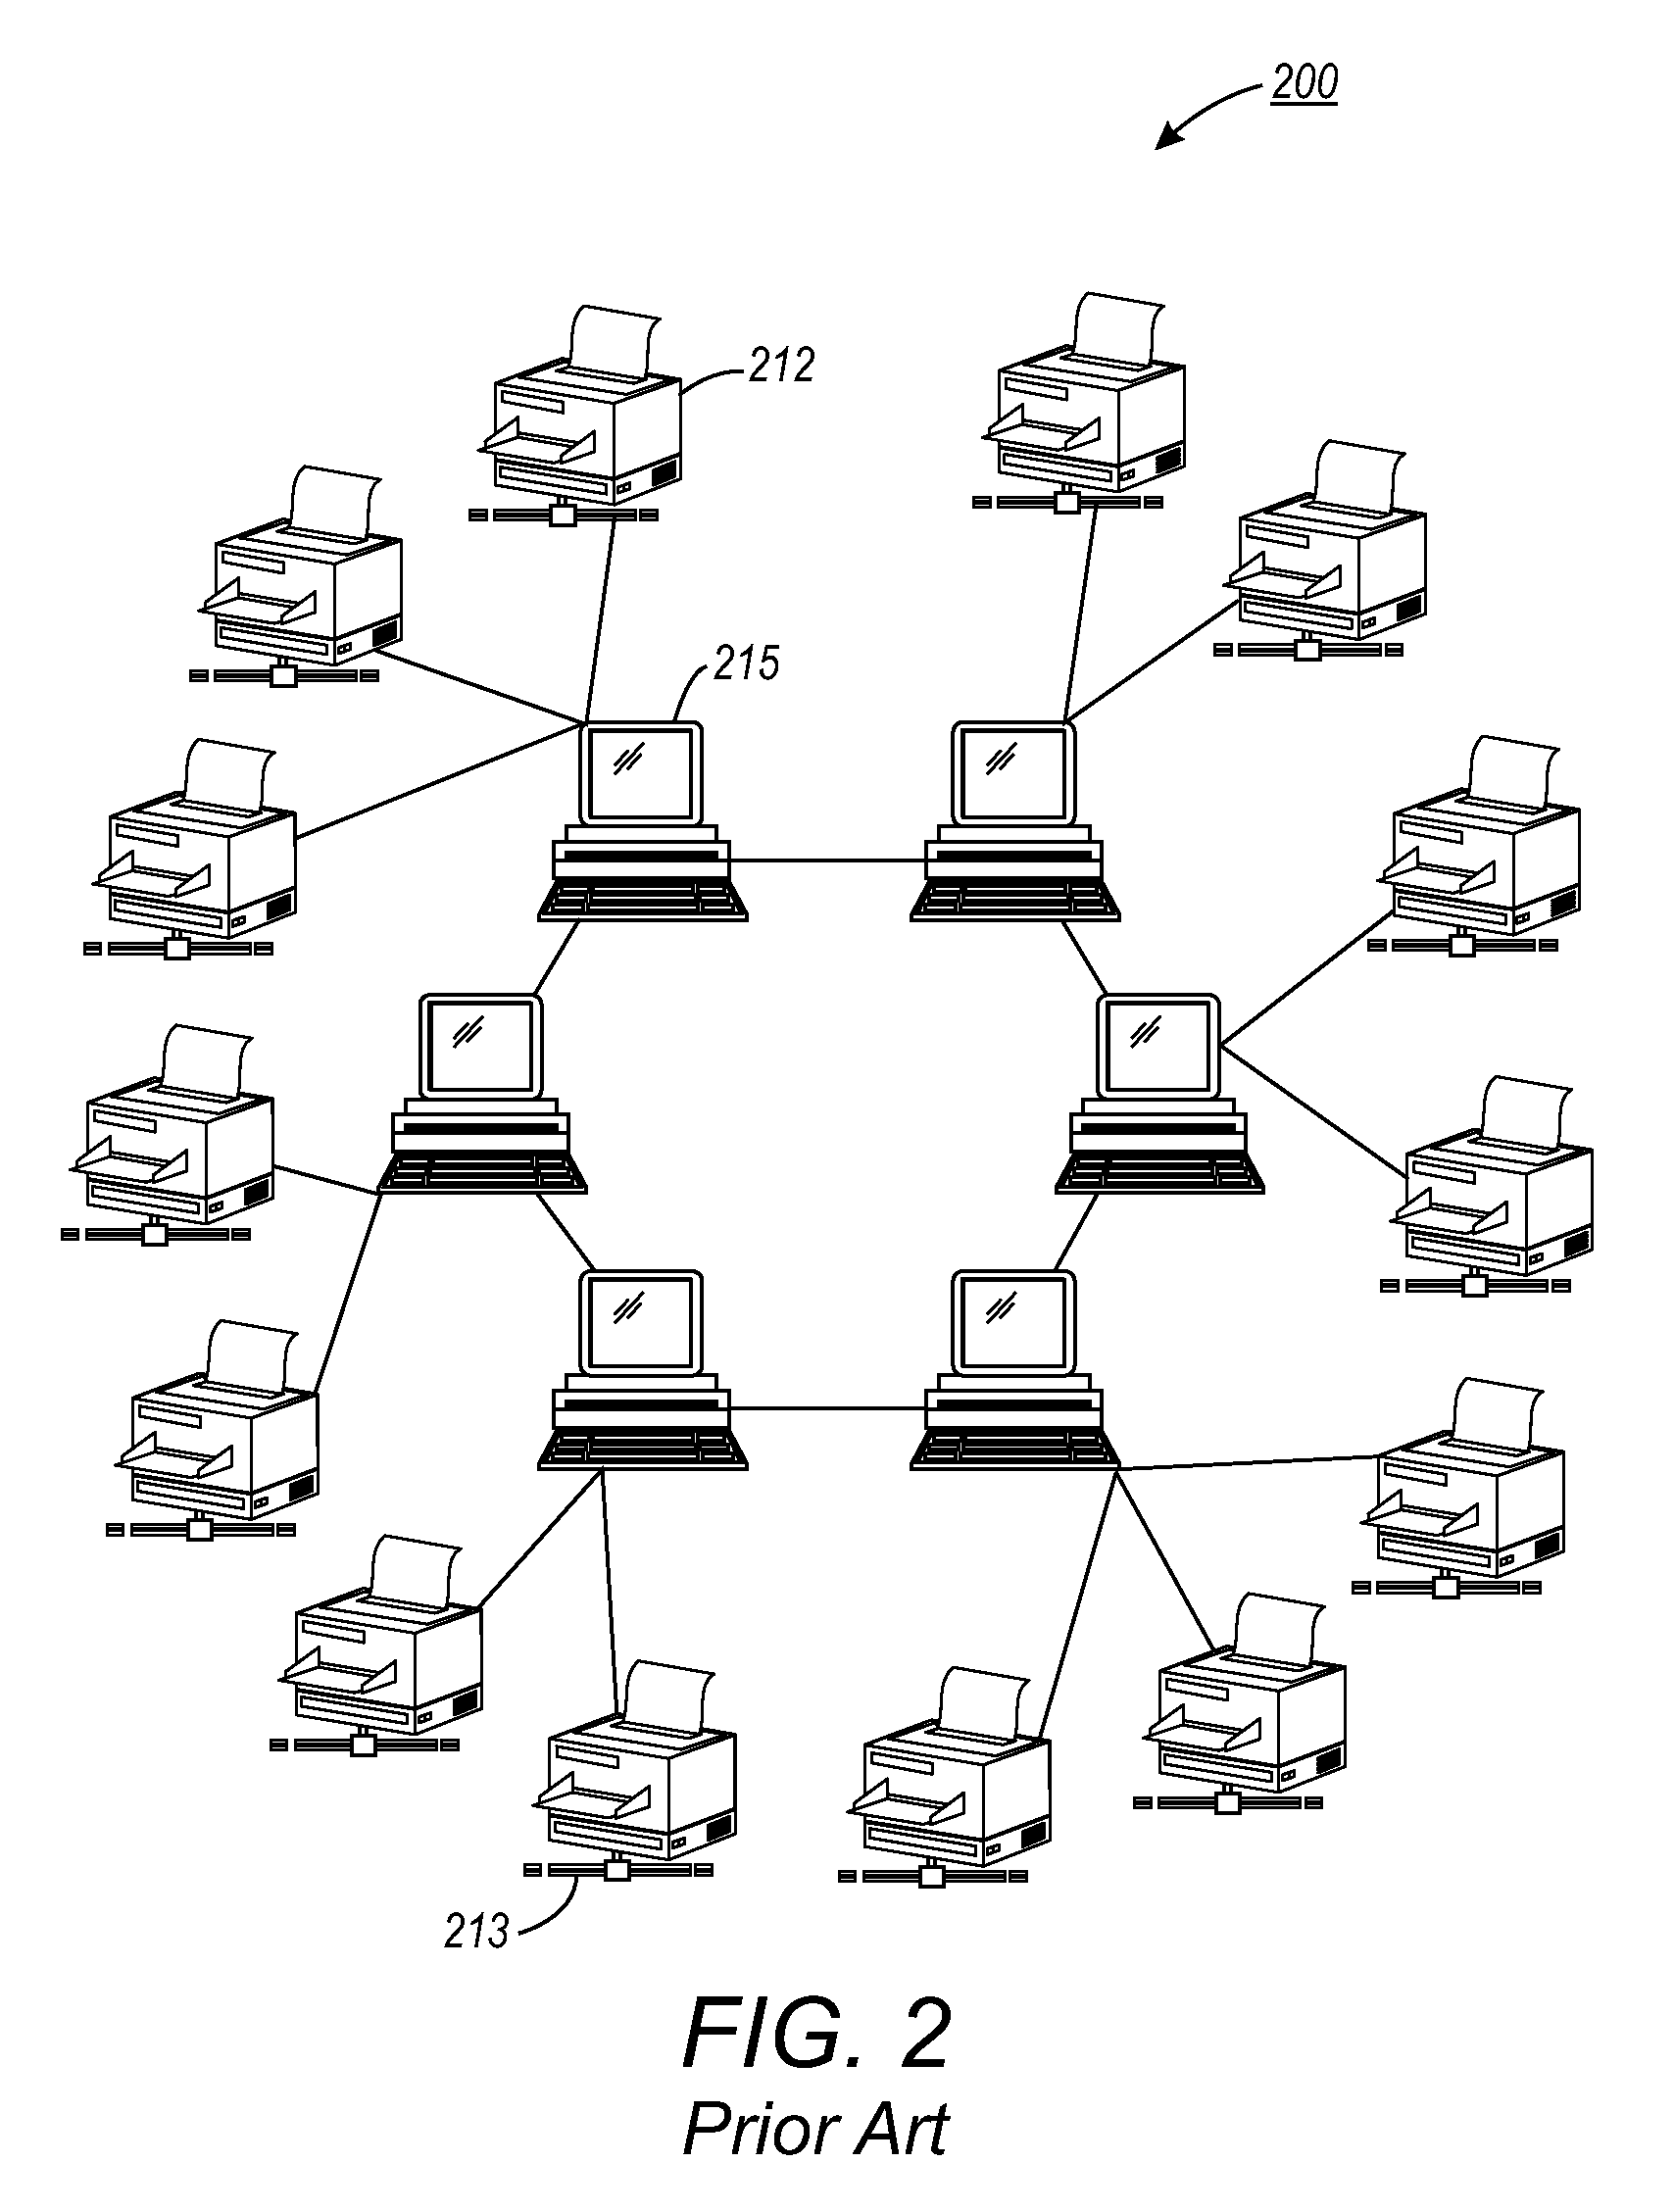 Method and system for automatic sharing and customization in a fleet of multi-function devices